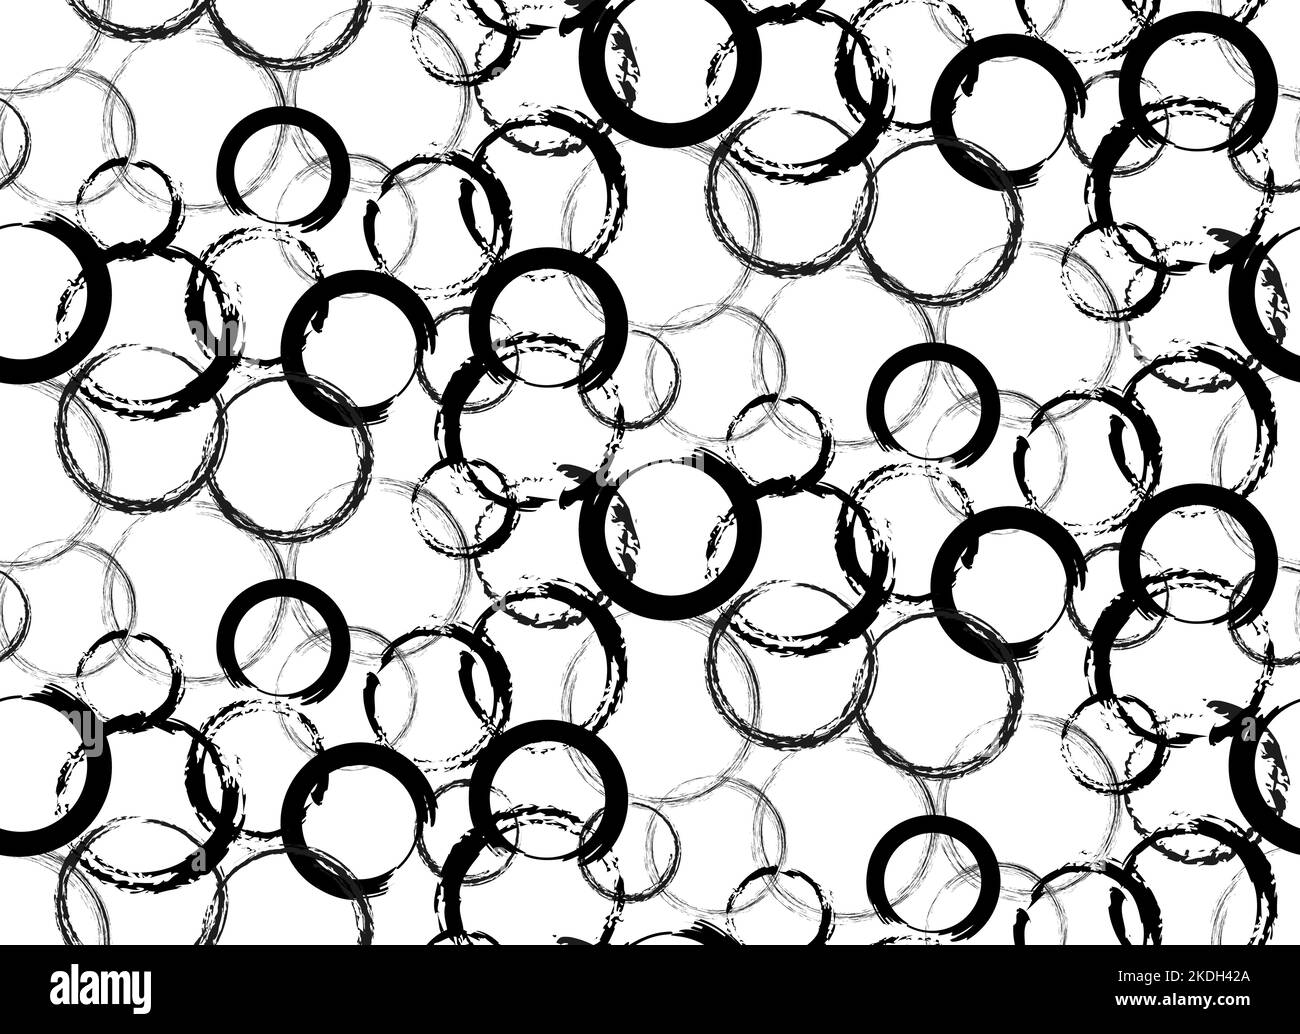 Black circles Brush texture, Seamless pattern. Grungy Enso Zen Circle Brush Set. Hand drawn black ink vector illustration isolated on white background Stock Vector